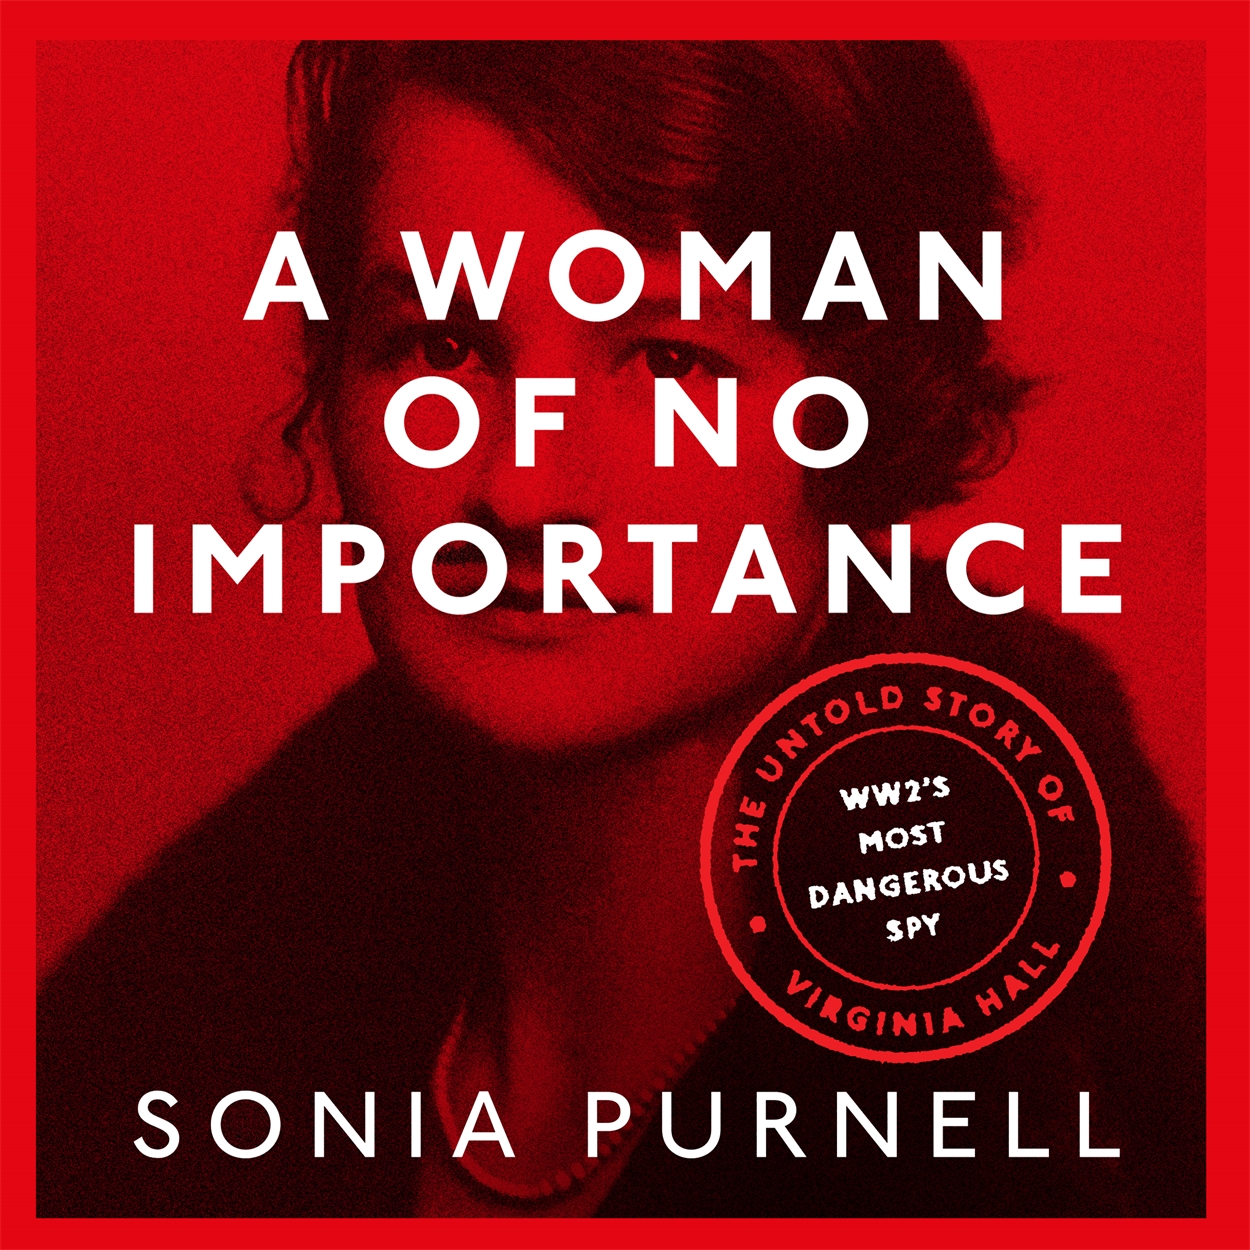 A Woman Of No Importance By Sonia Purnell Hachette Uk